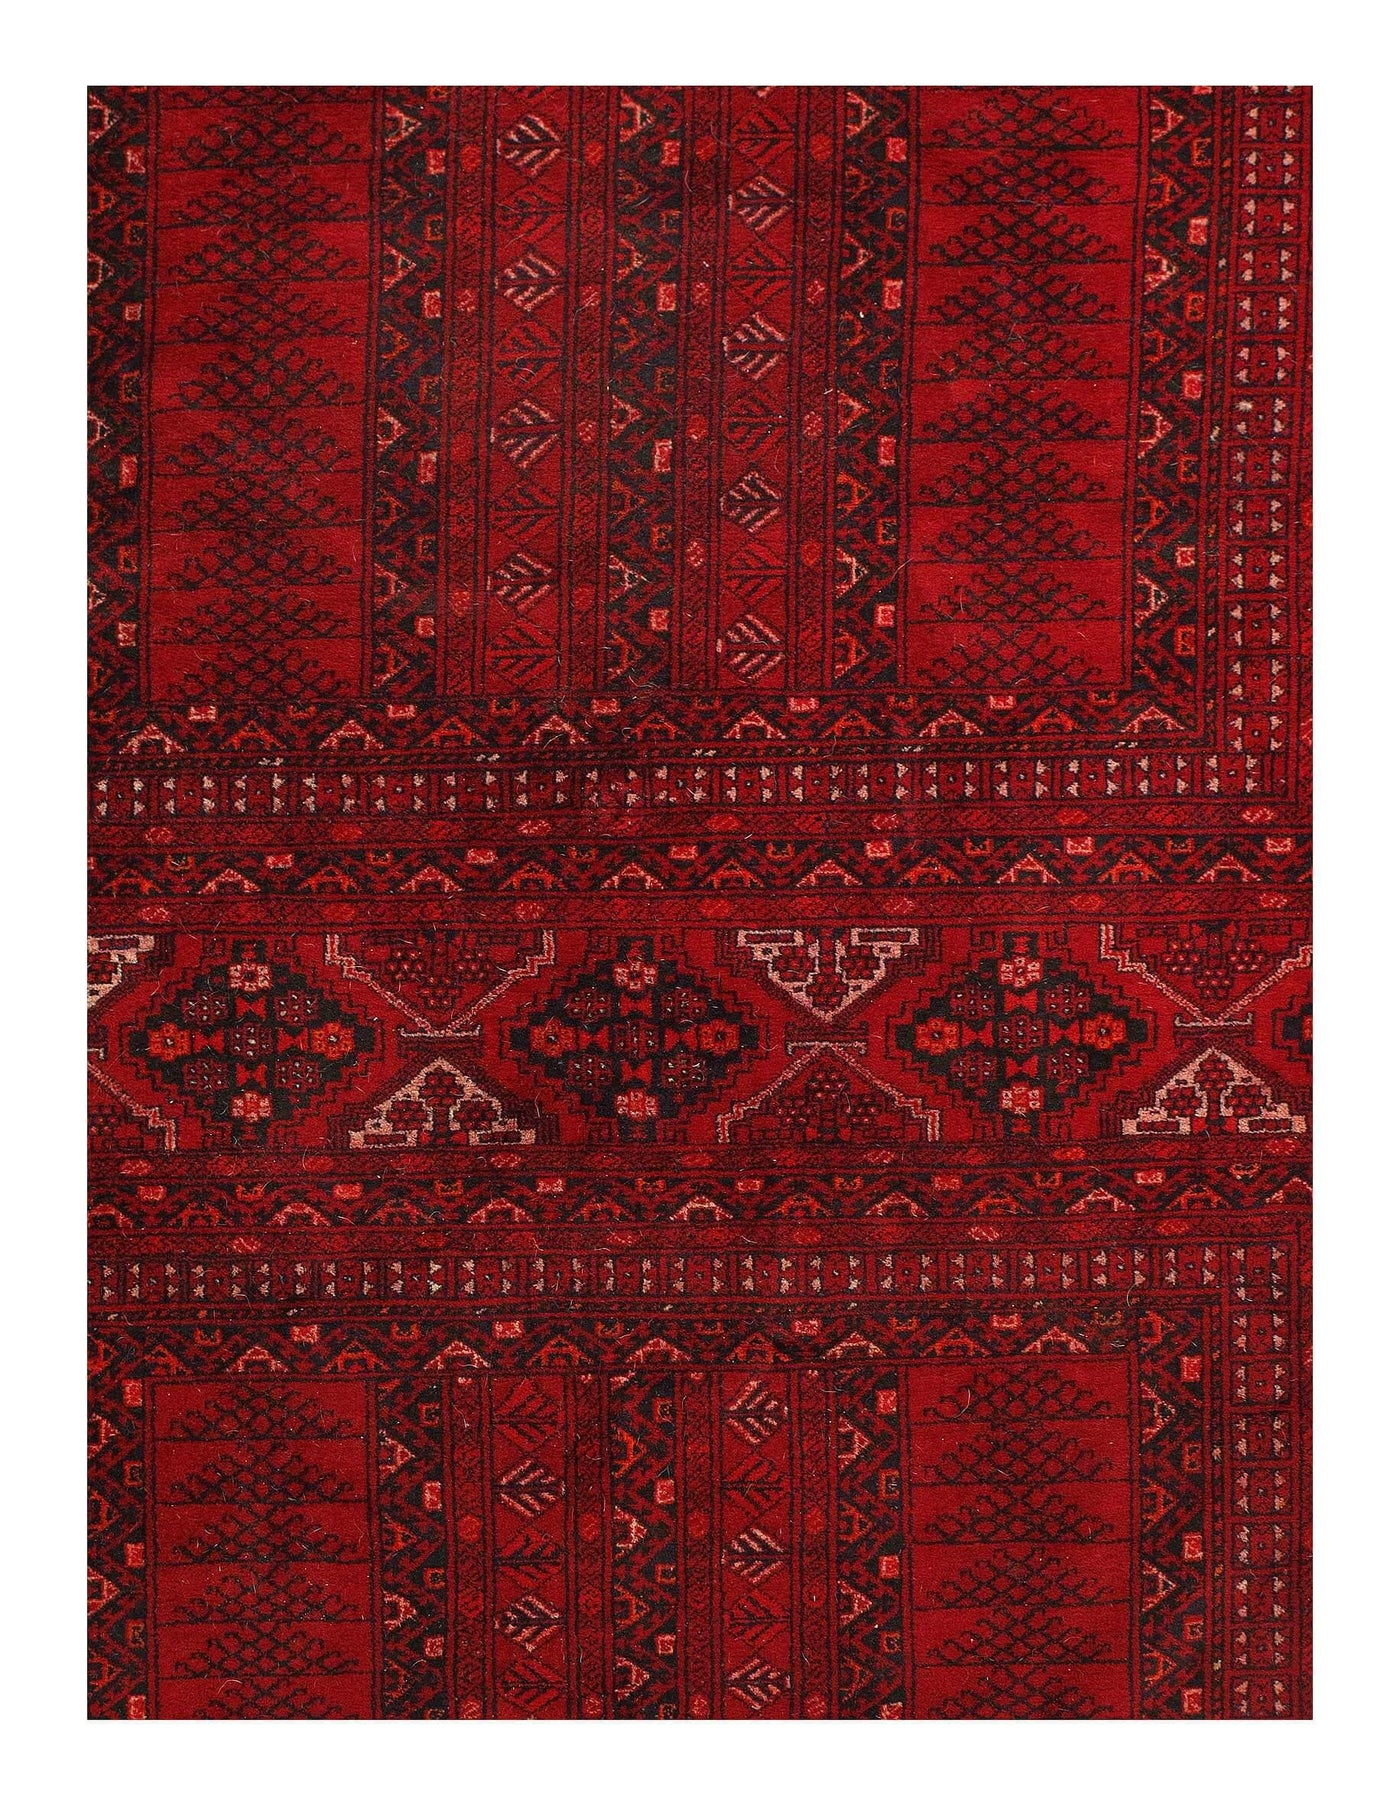 Canvello Antique Hand-Knotted Vintage Red Rug - 6' X 8'2''